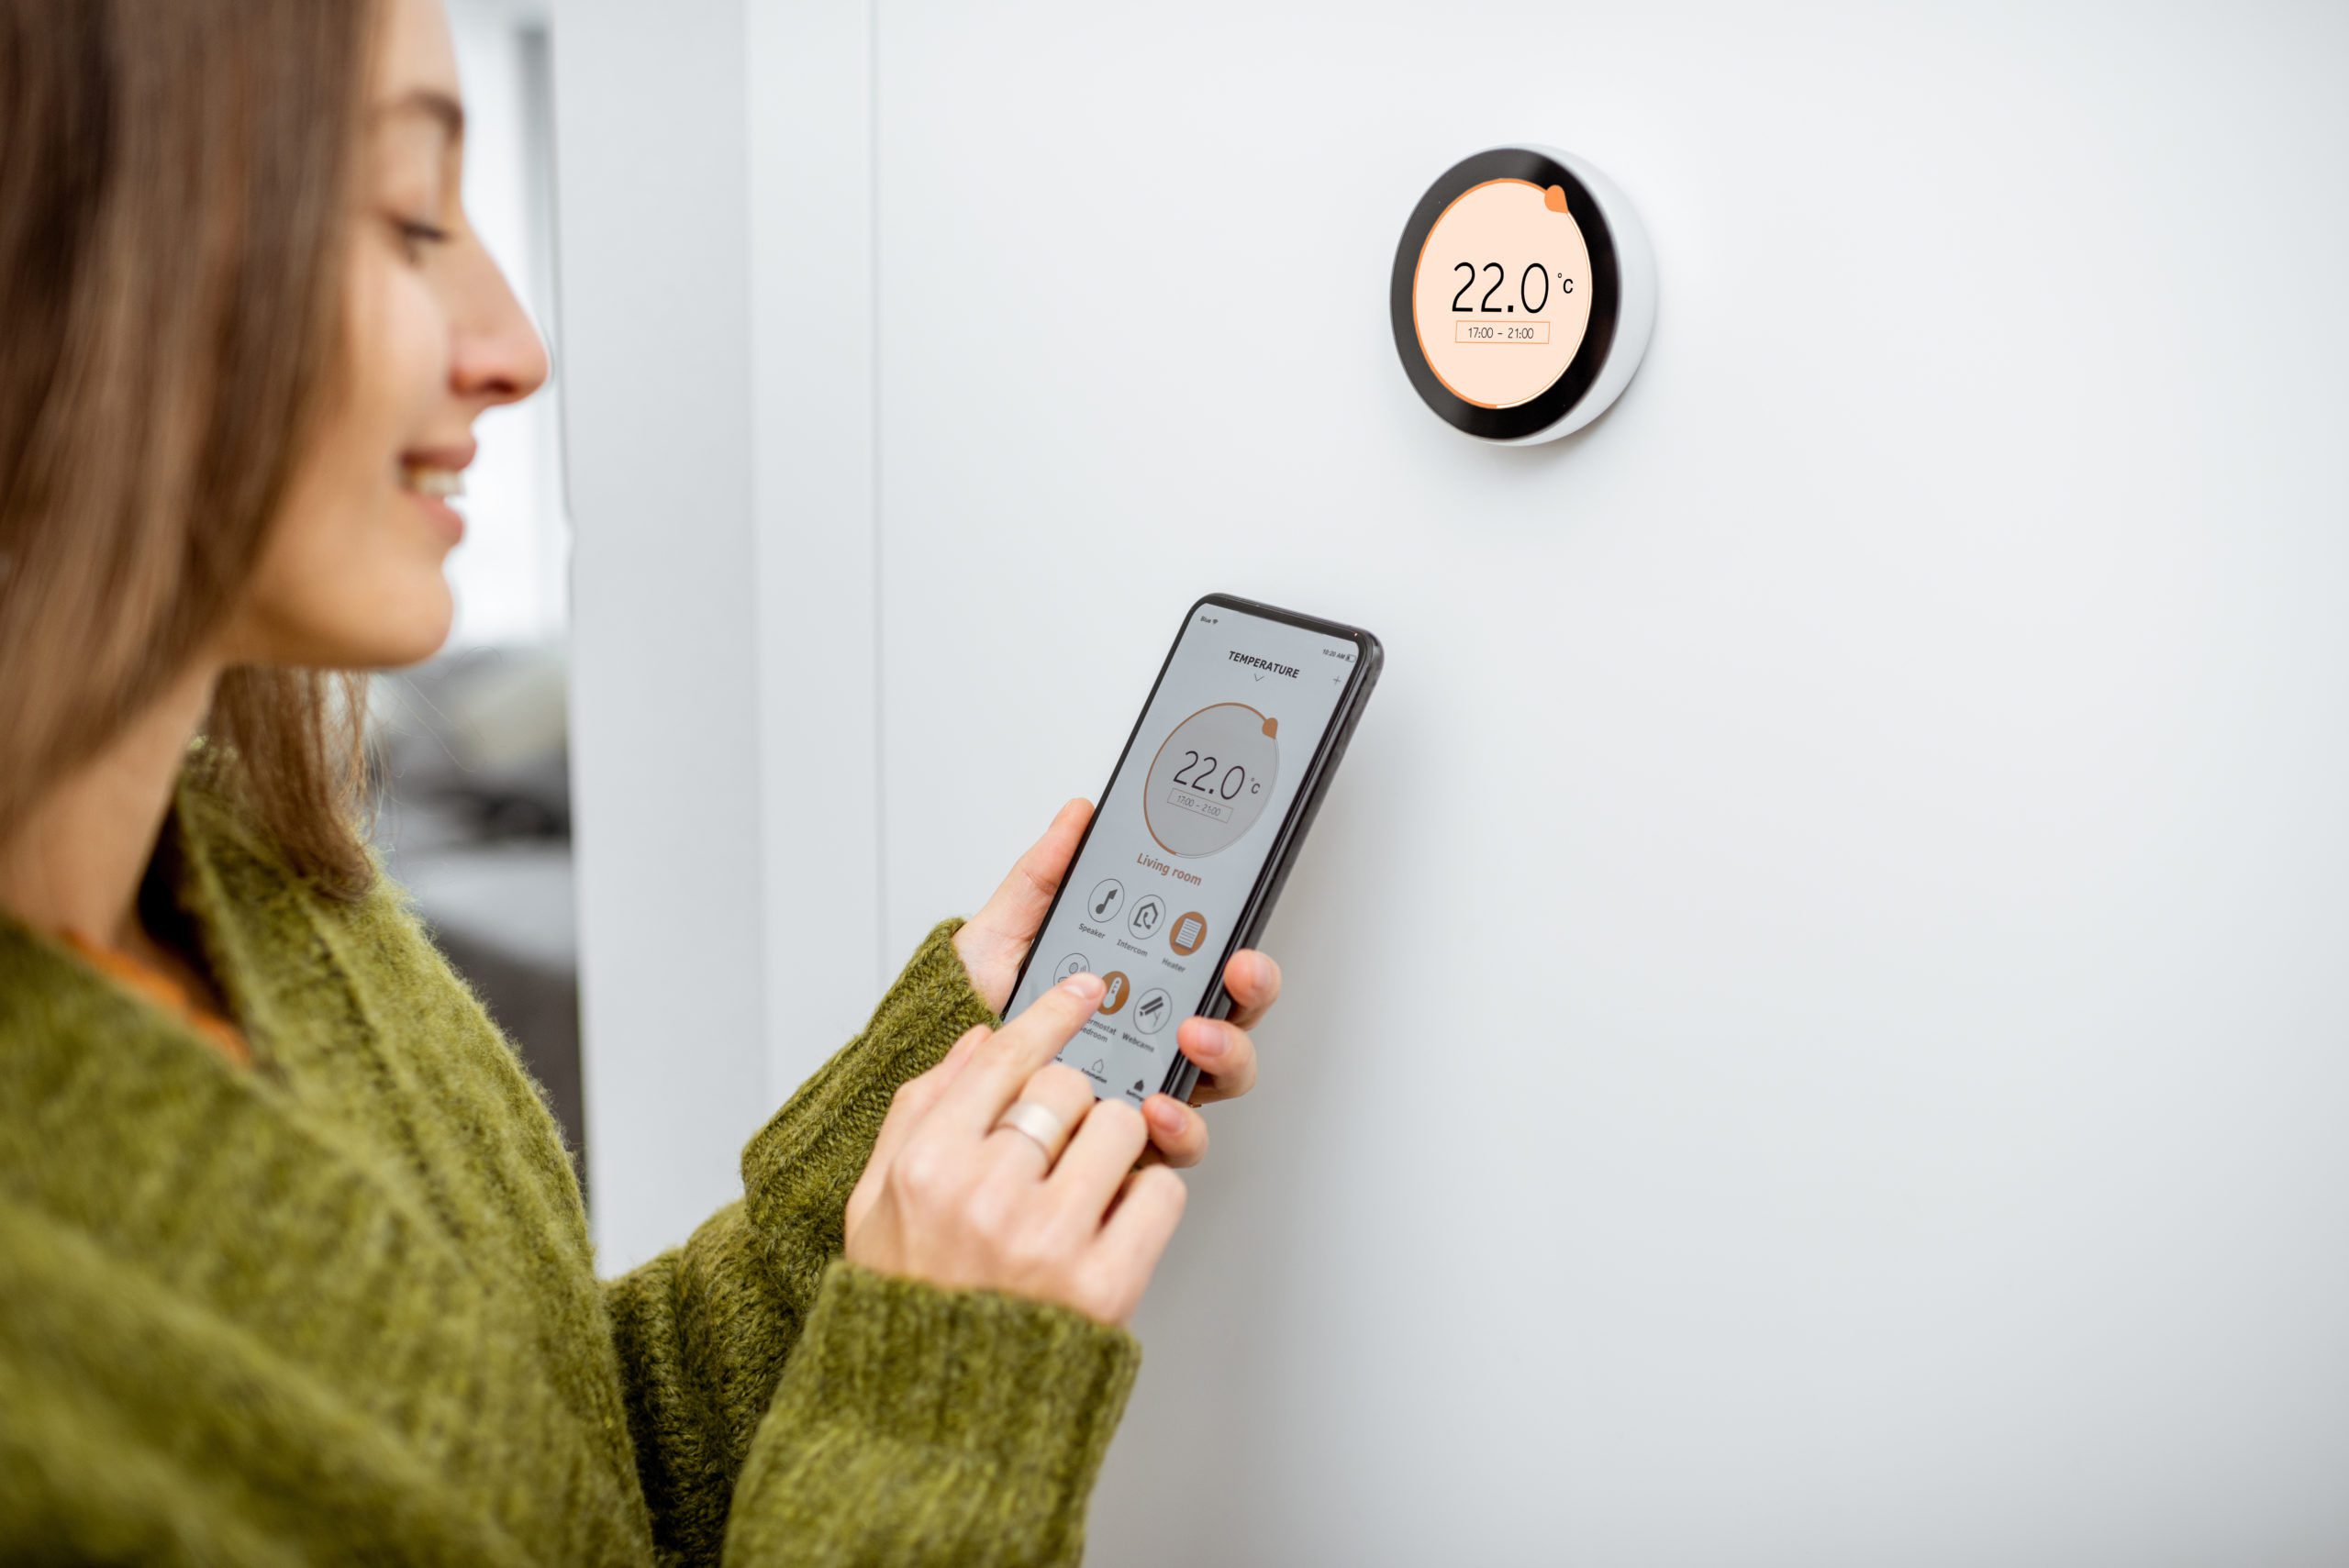 Featured image for “The Benefits of Switching to a Smart Thermostat”